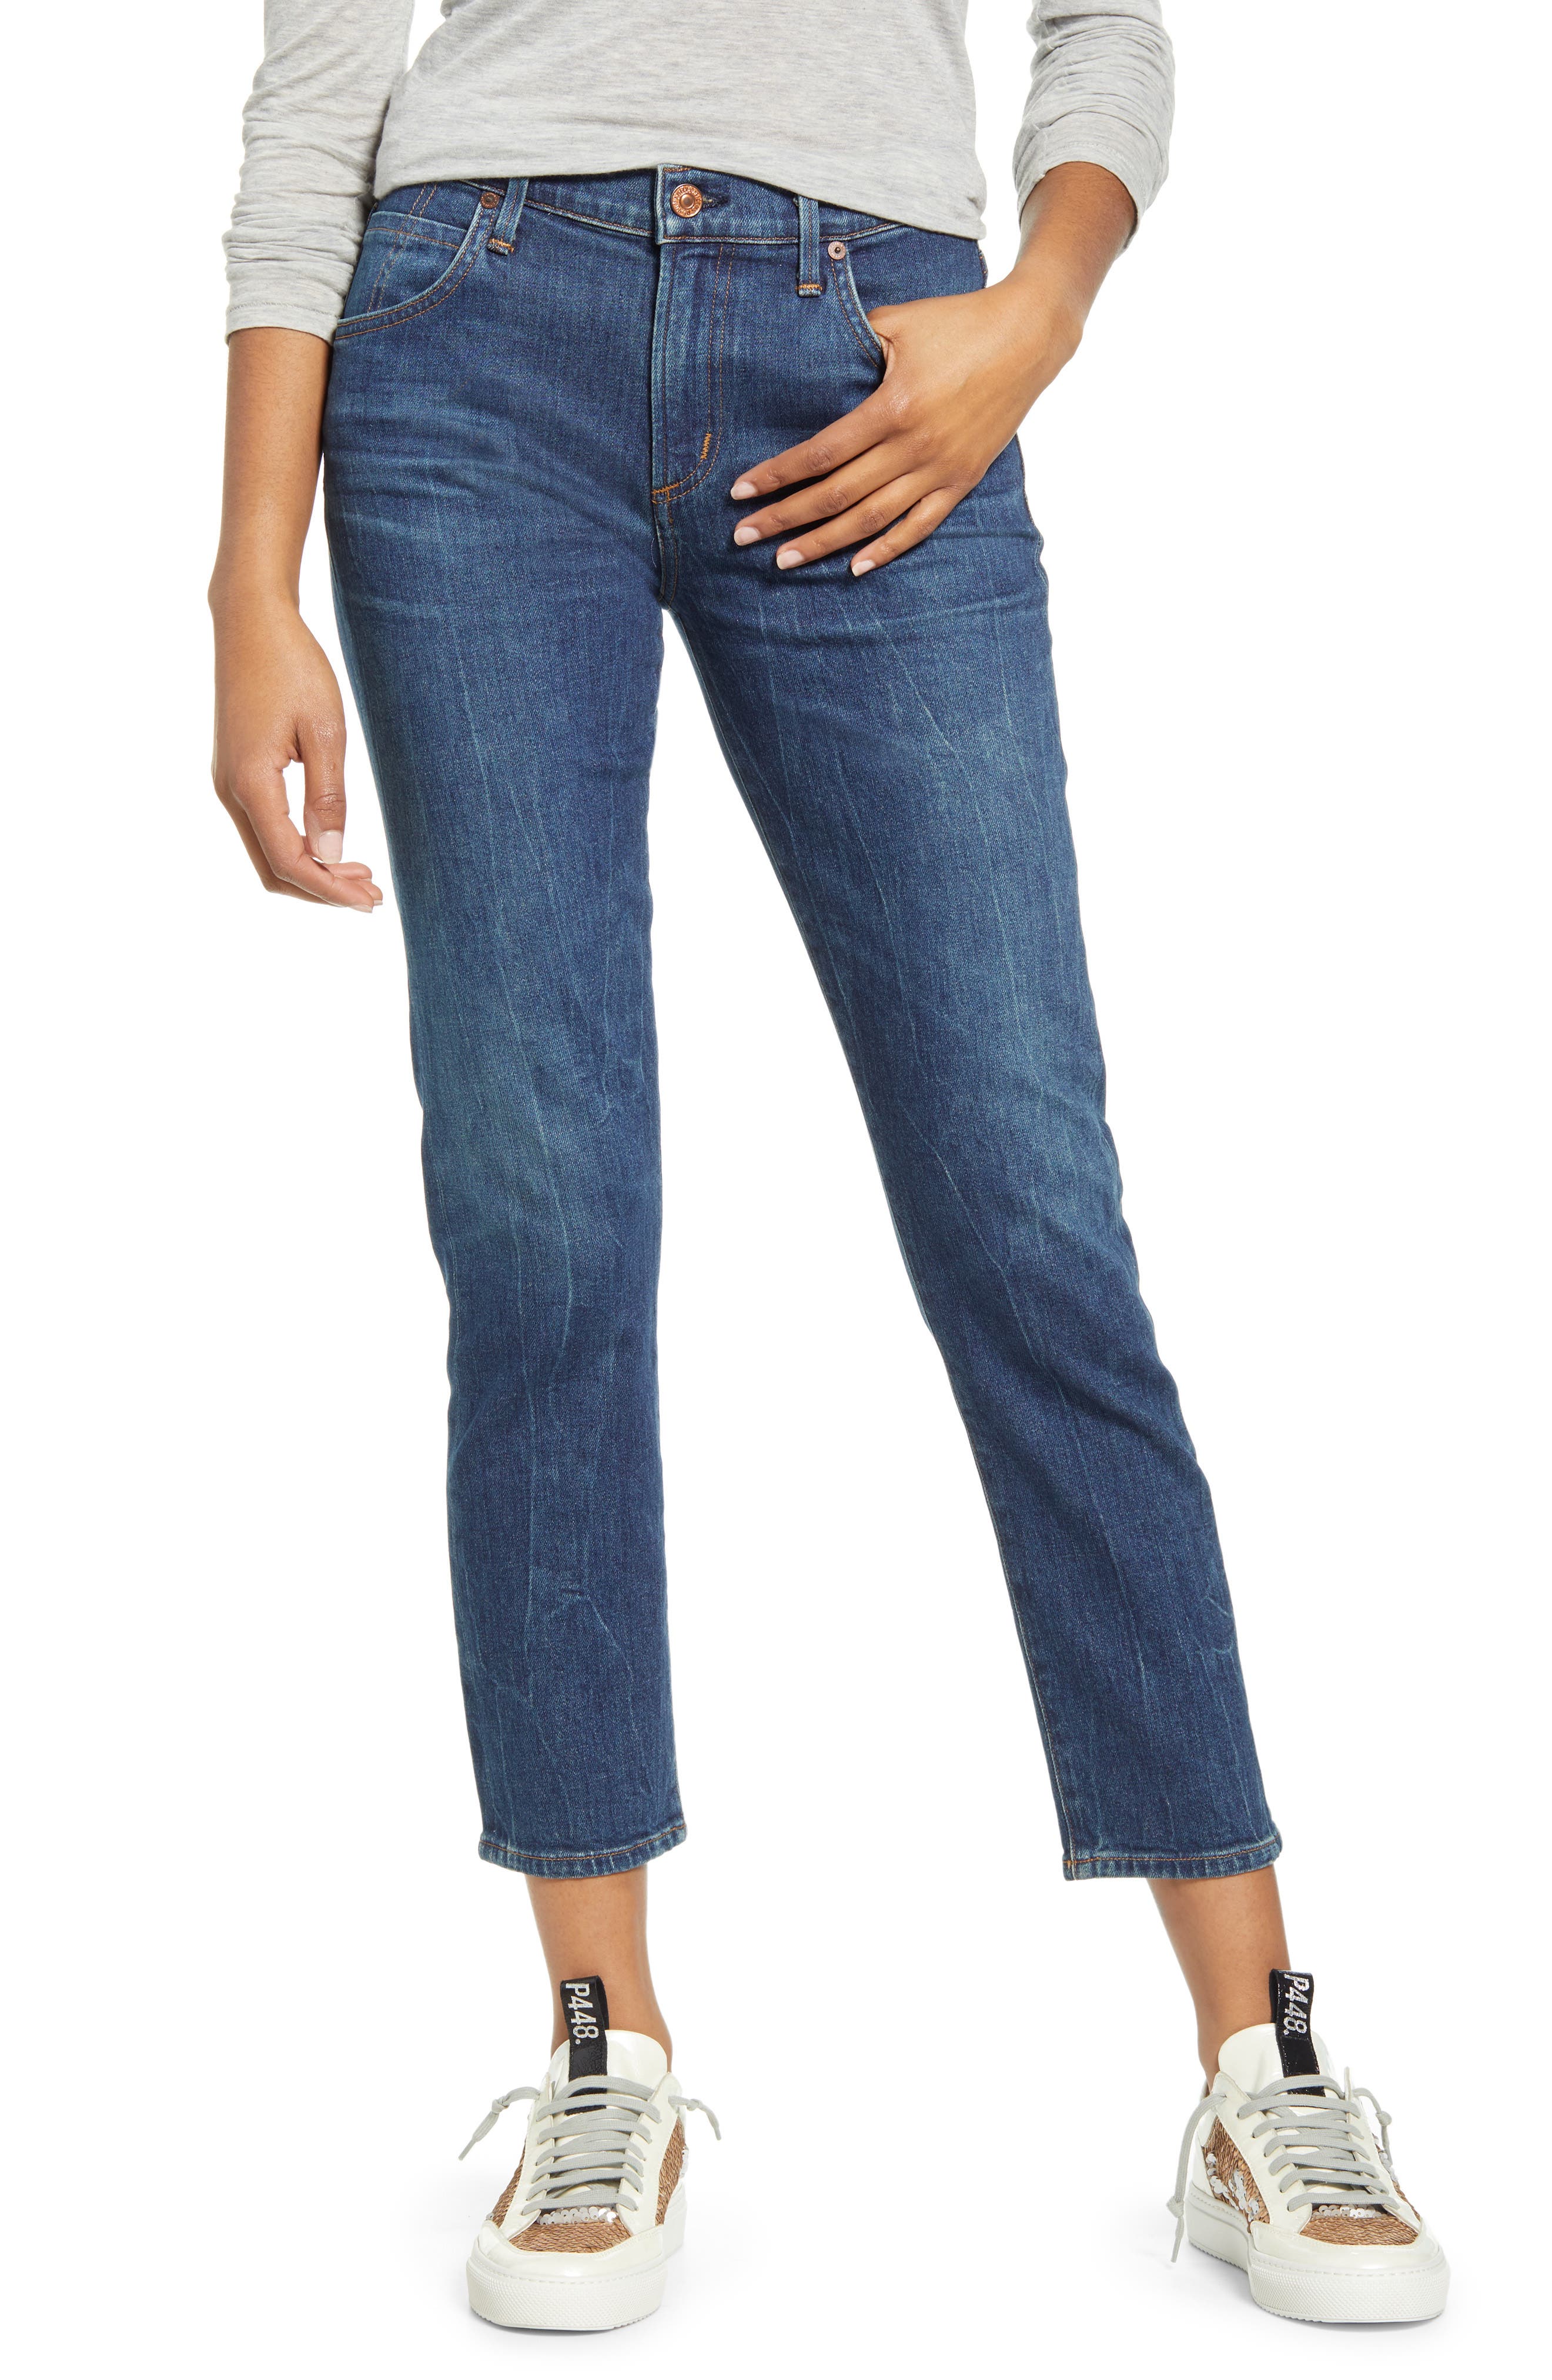 citizens of humanity elsa jeans